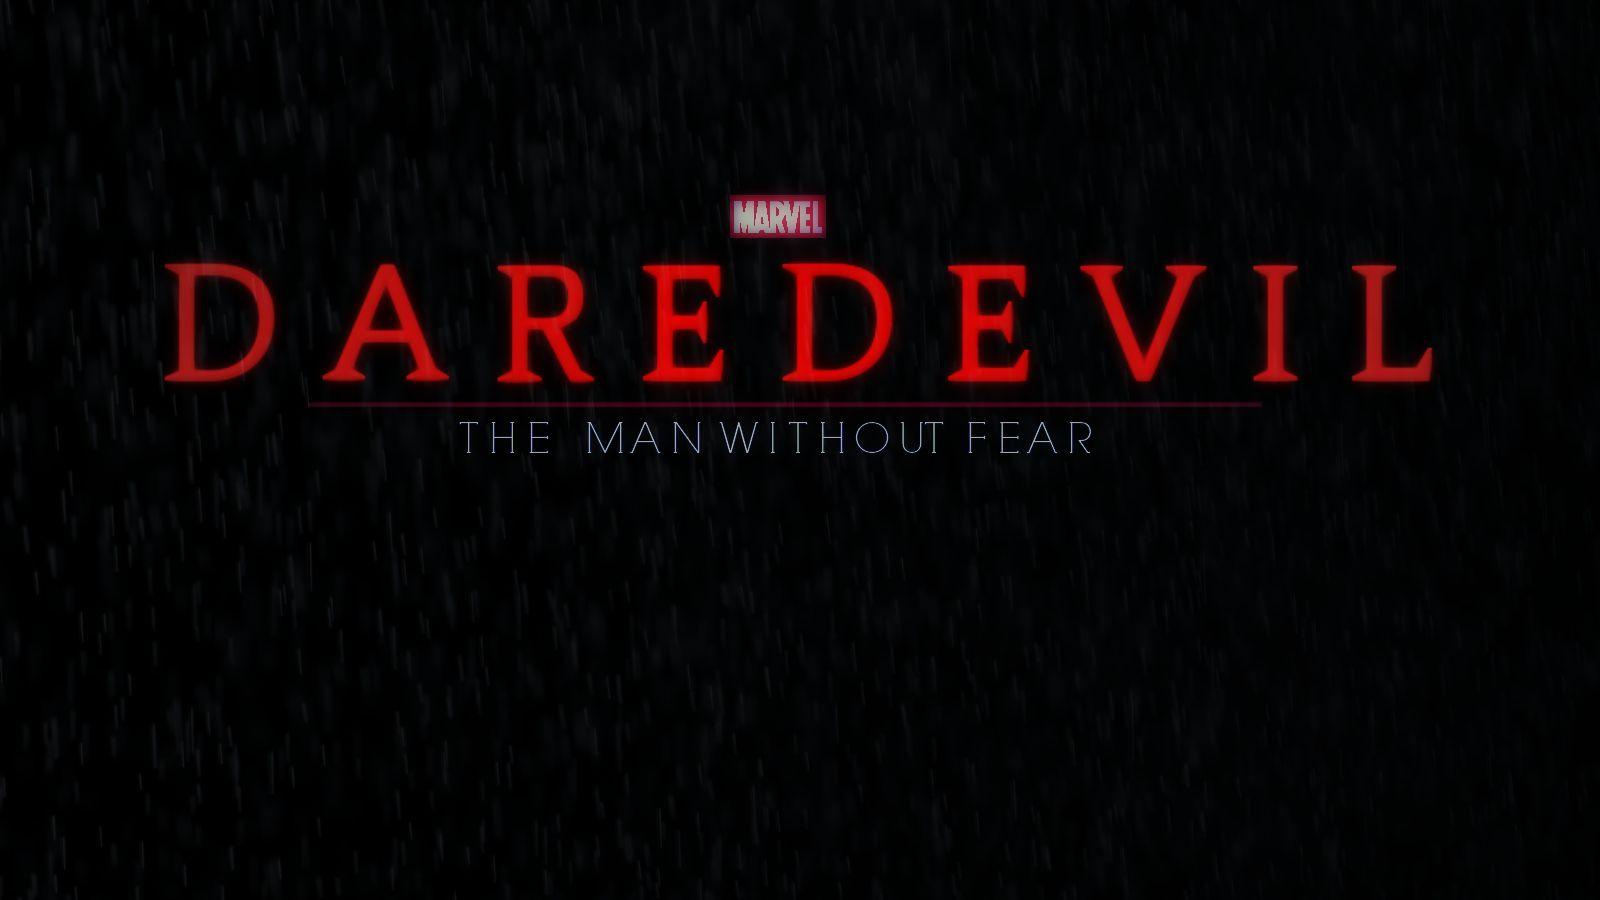 Marvel's Daredevil The Man Without Fear Logo 2015